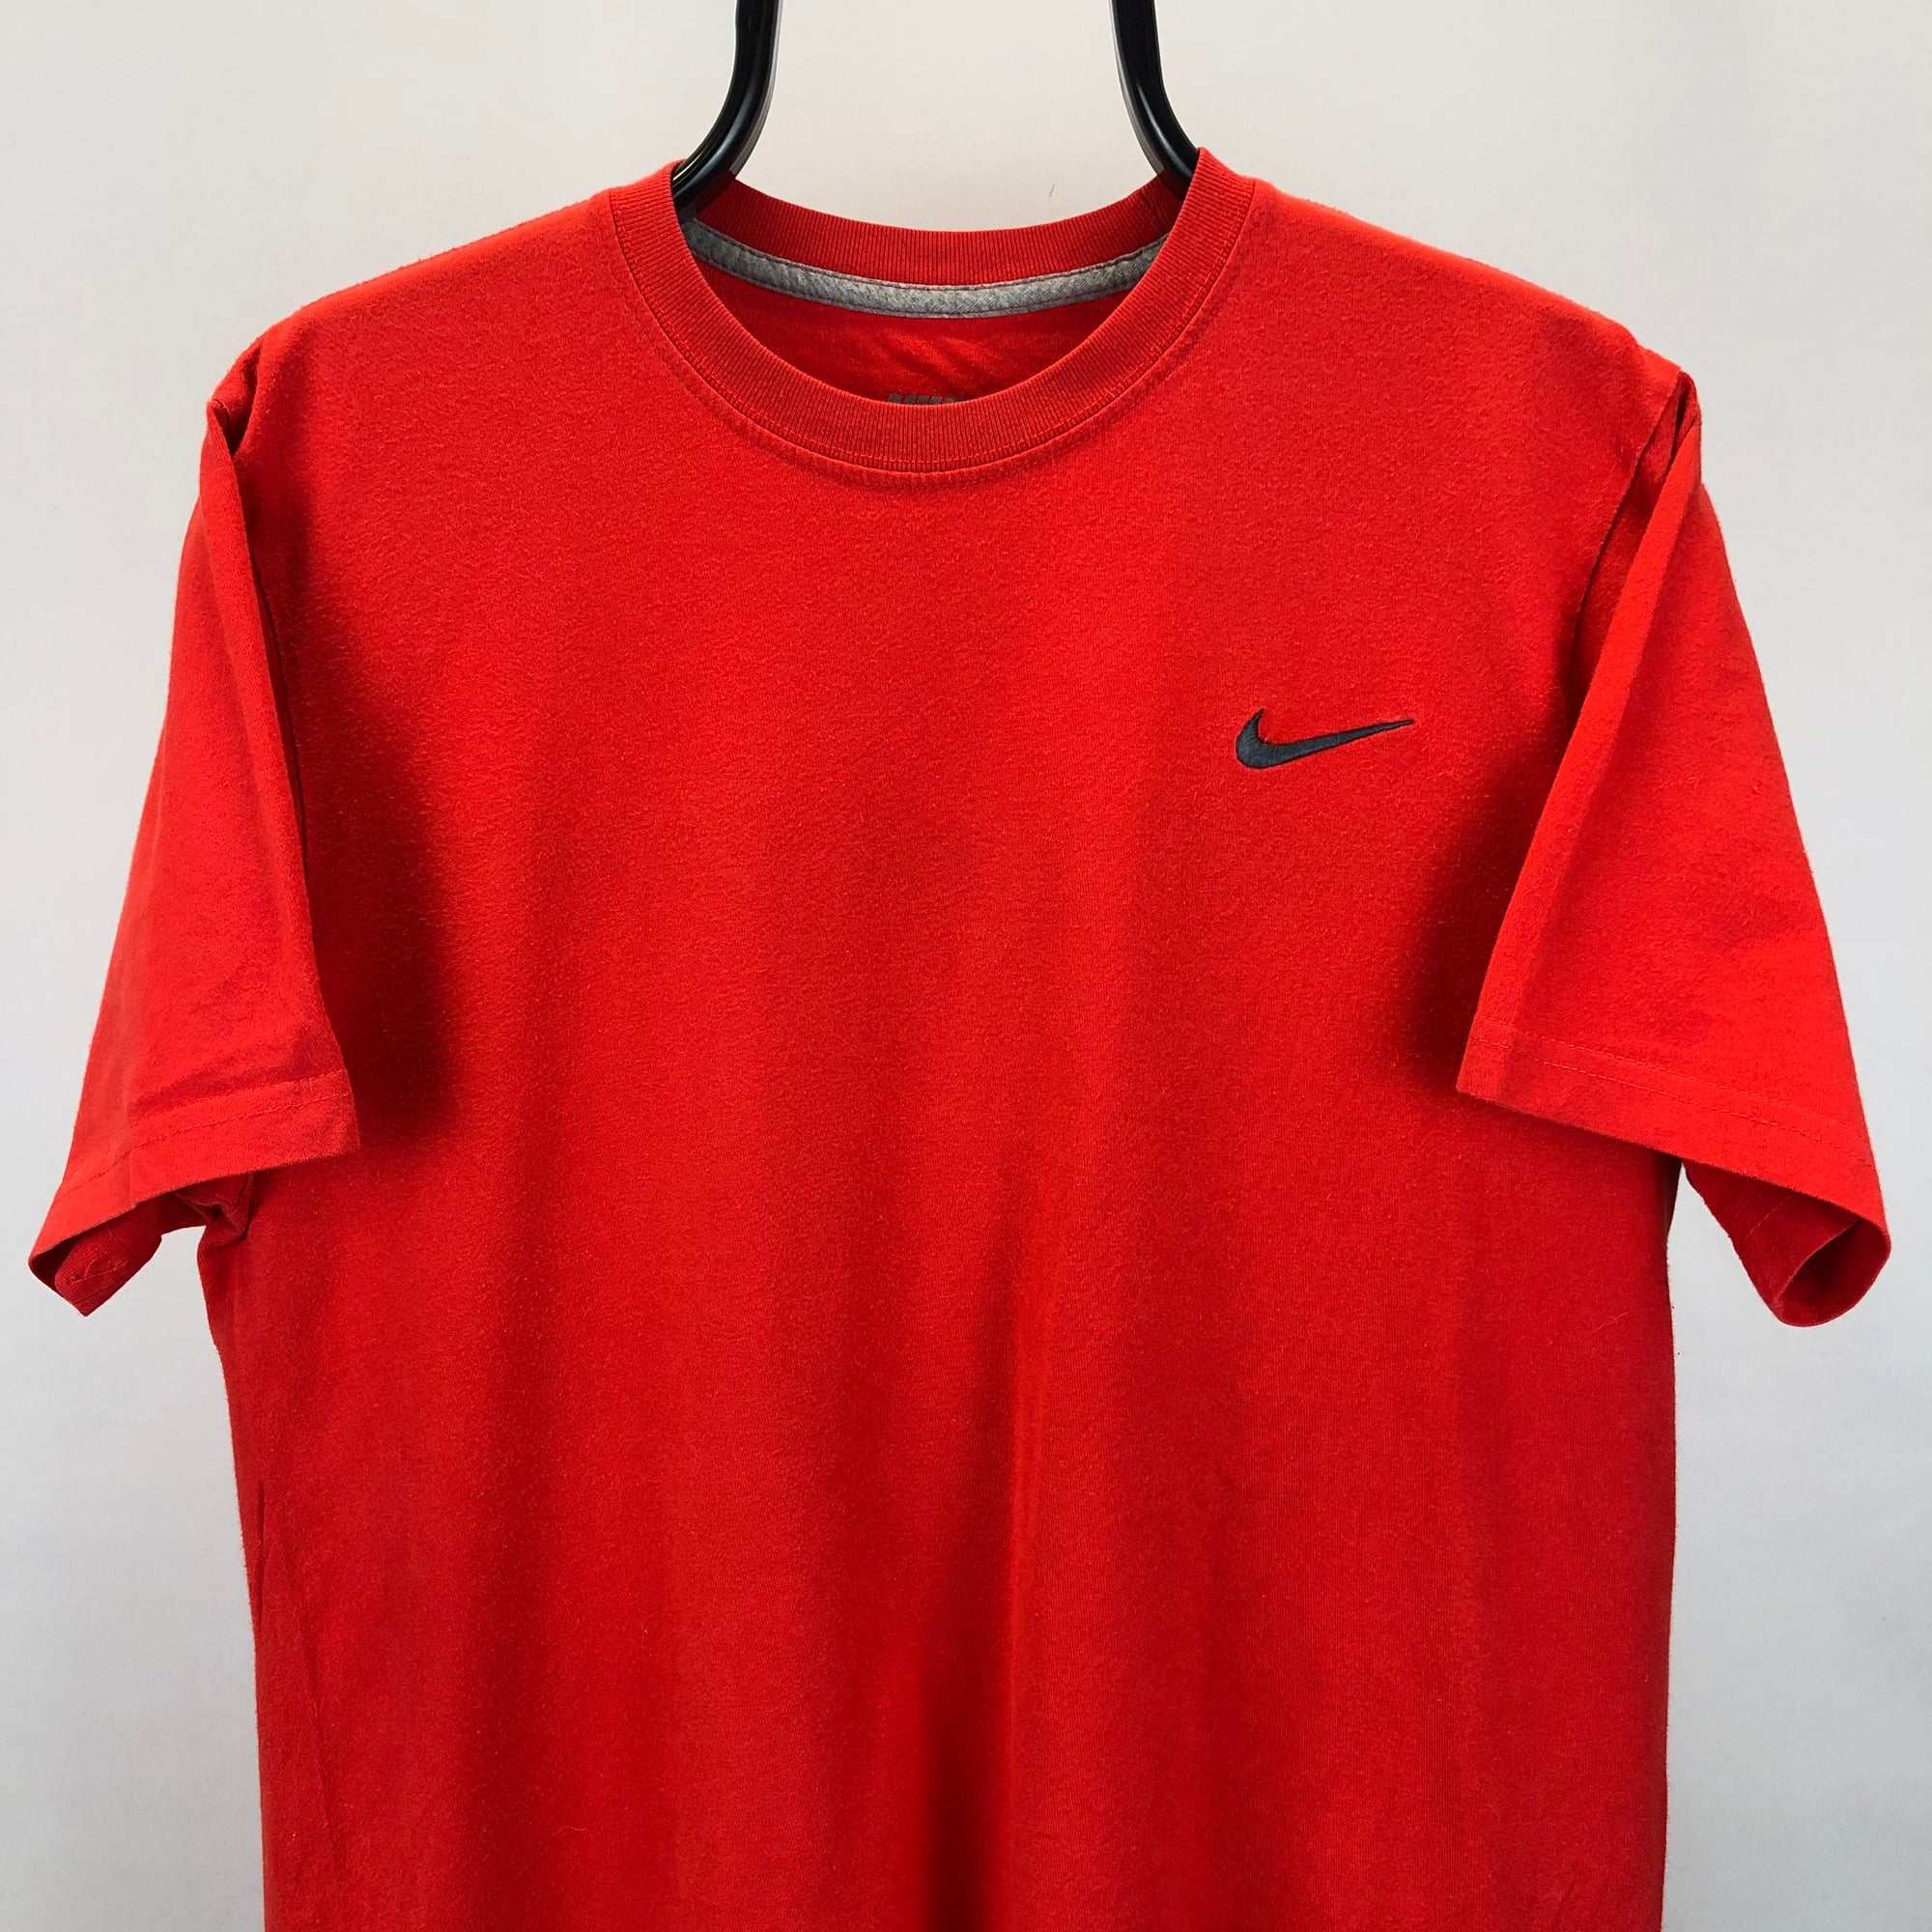 Nike Embroidered Swoosh Tee in Red - Men's Medium/Women's Large